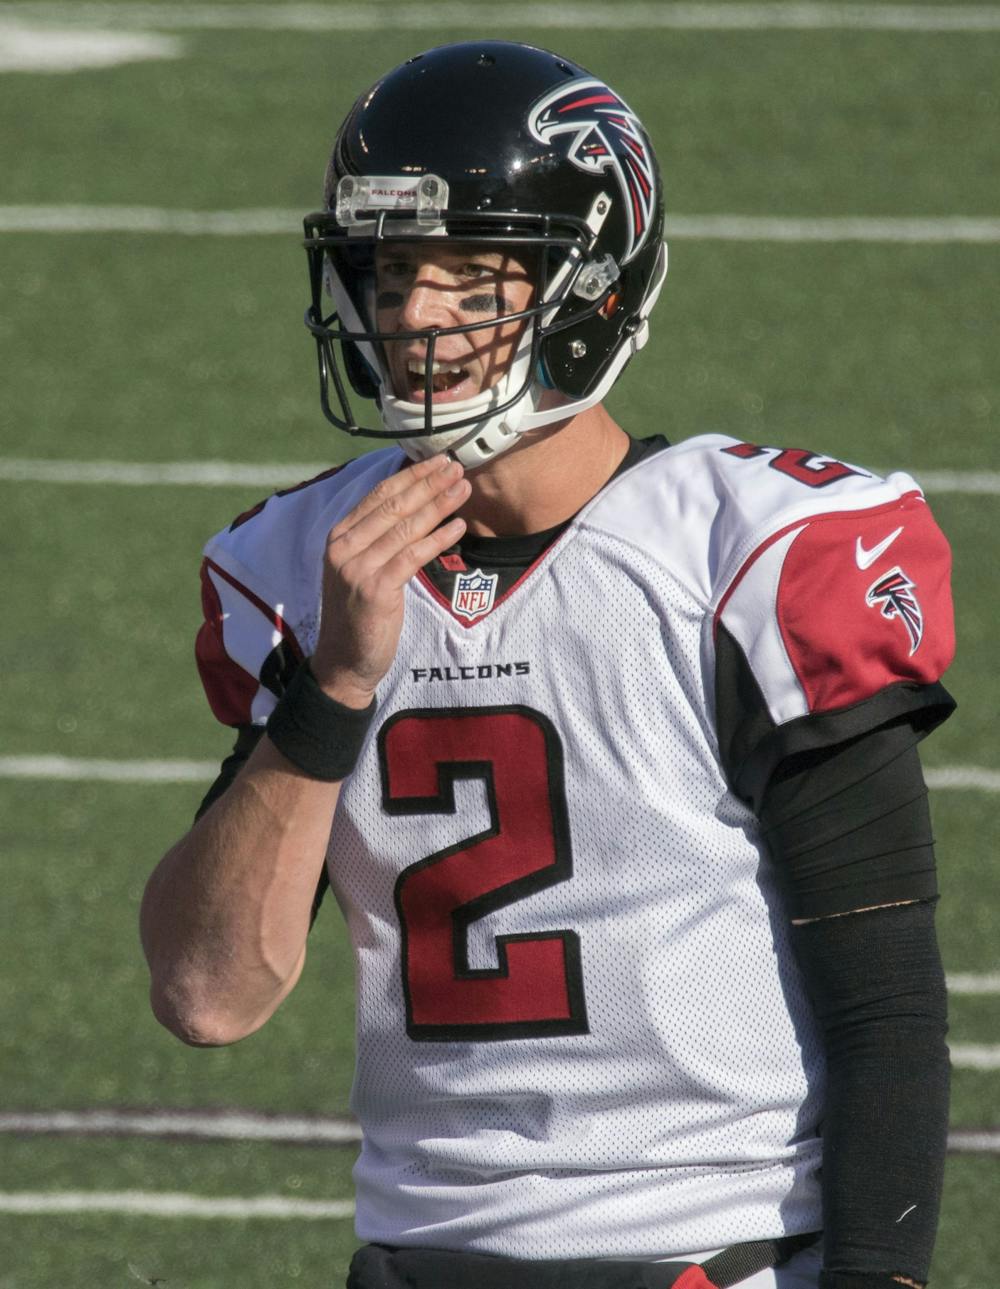 <p>Former Atlanta Falcons quarterback Matt Ryan prepares at the line of scrimmage against the Baltimore Ravens Oct. 19, 2014. Ryan was selected to four Pro Bowls in his 14 seasons with the Falcons. <strong>Photo Credit: Keith Allison, KeithAllisonPhoto.com</strong></p>